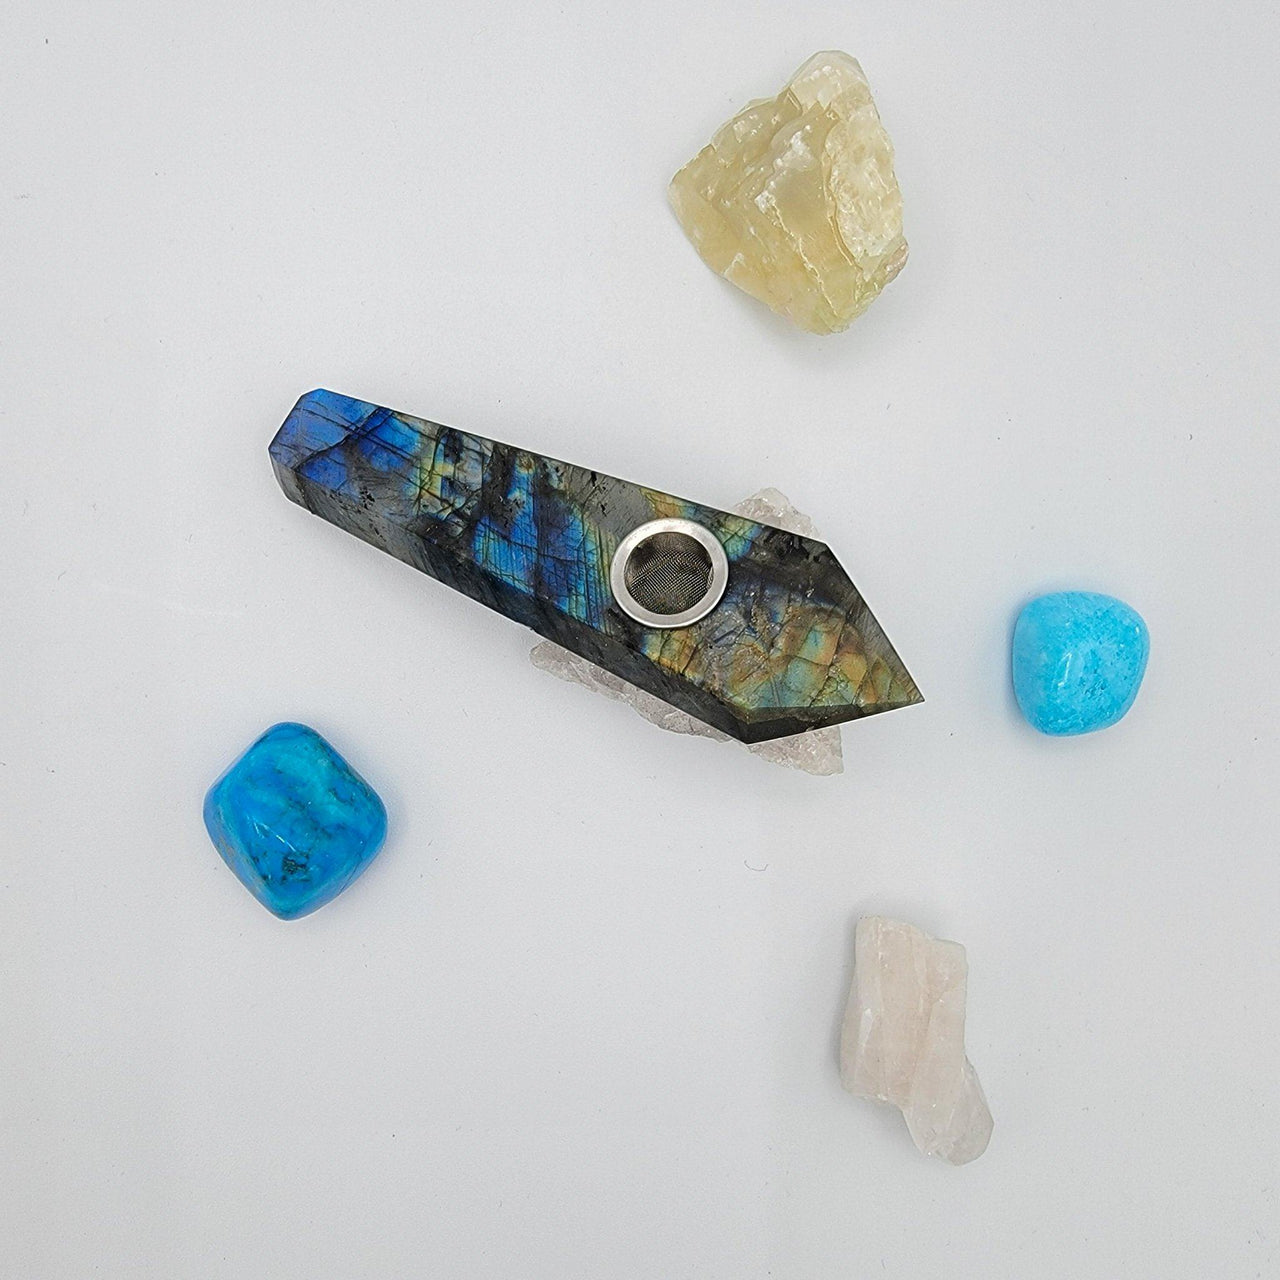 Deep Blue Labradorite Pipe one of the most popular gemstone pipes, may aid helping opening your crown chakra! A great gift to anyone